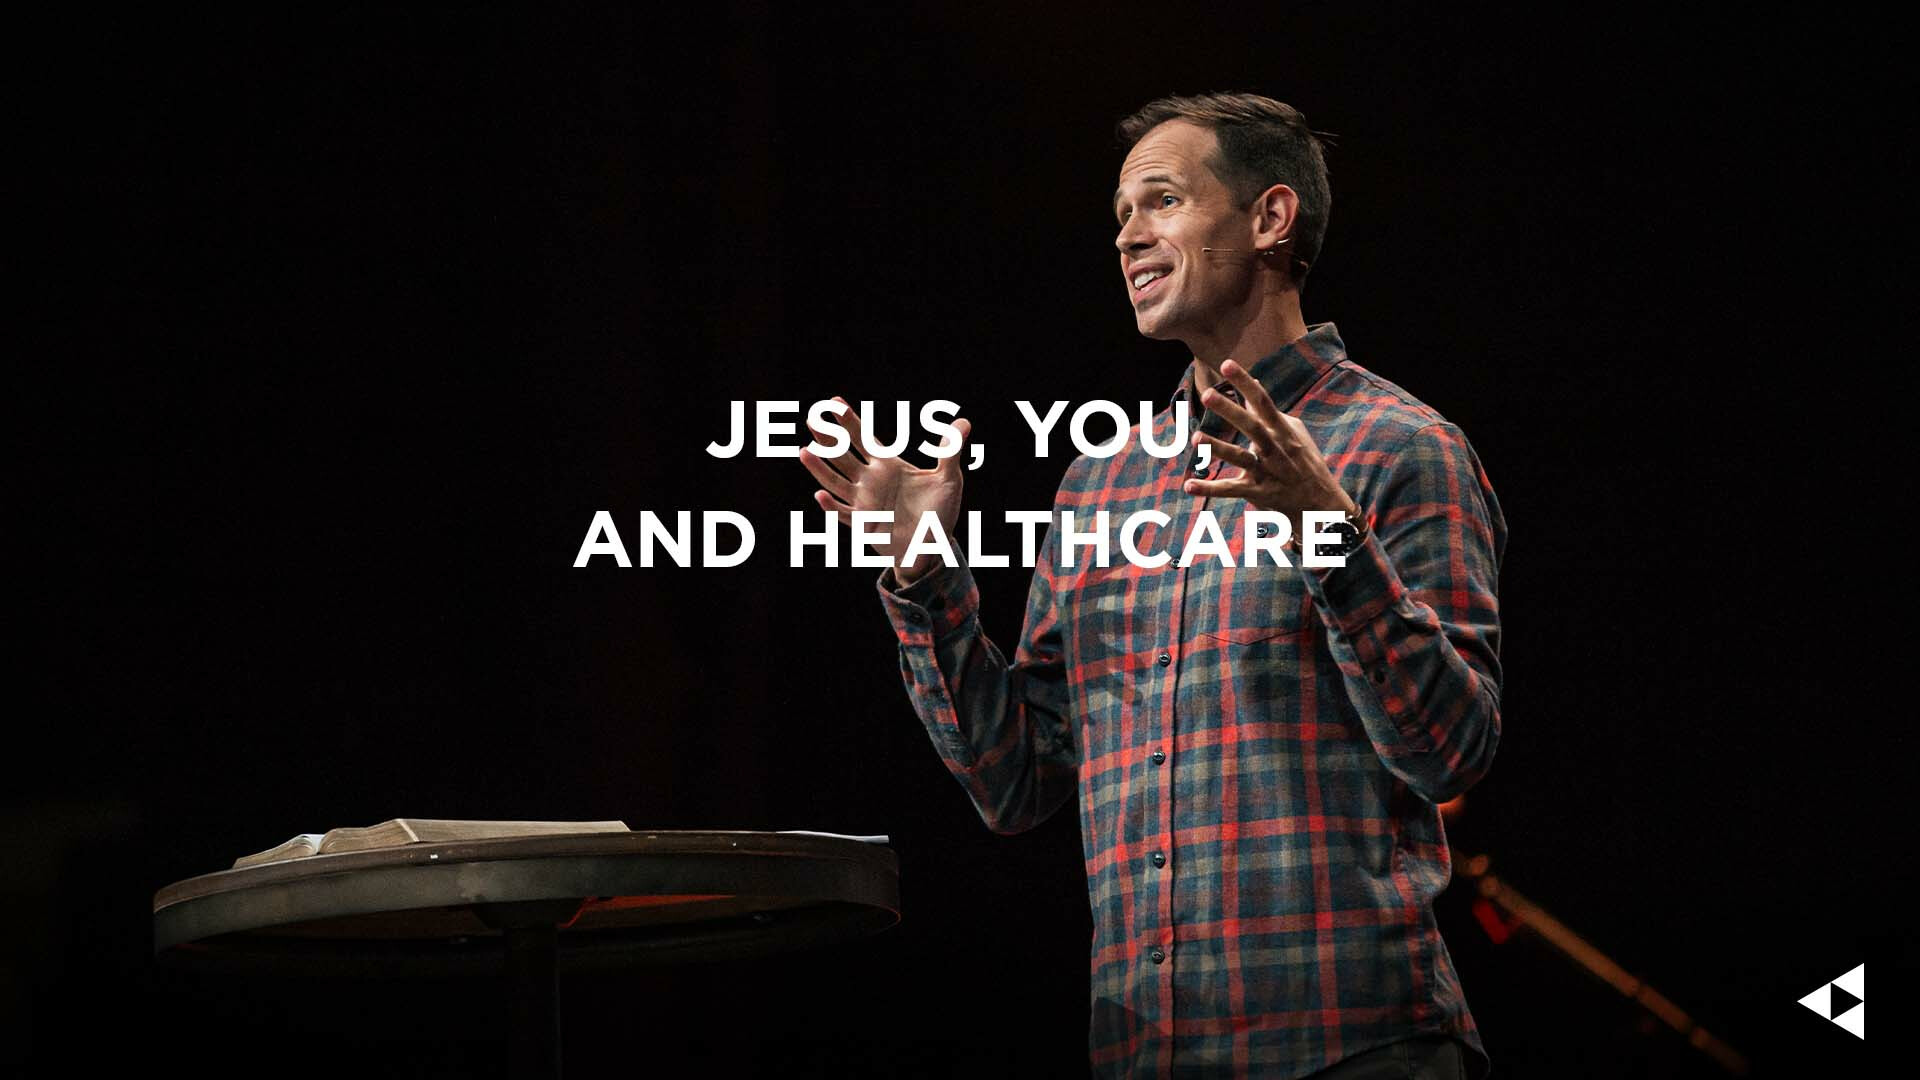 Jesus, You, and Healthcare